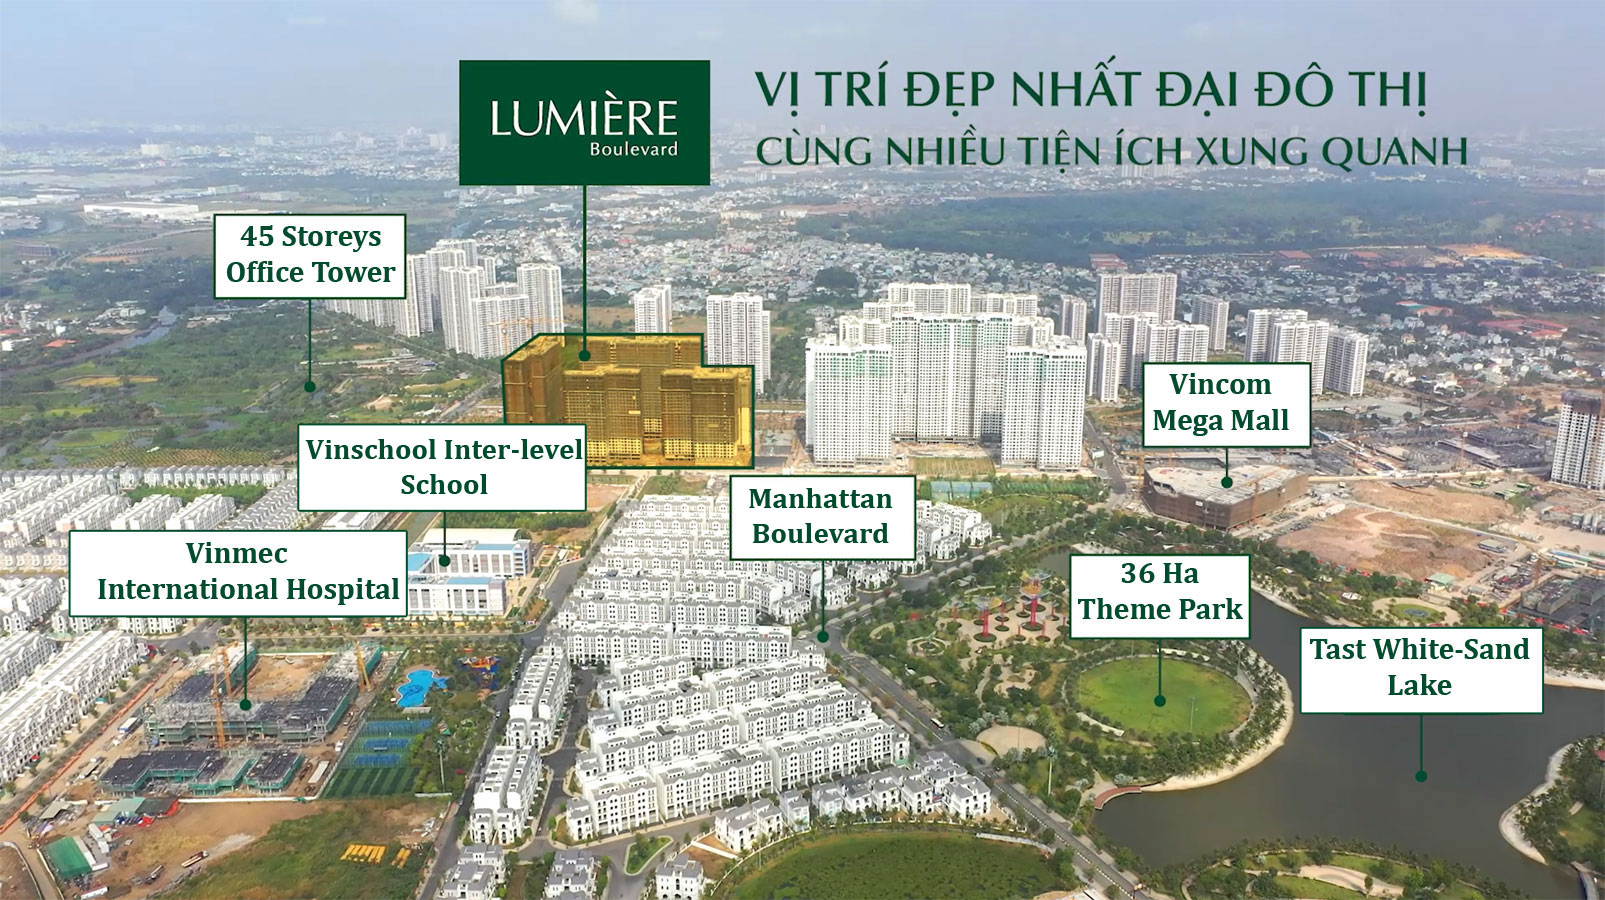 Lumiere Boulevard Apartment Project In Vinhomes Grand Park Urban Area